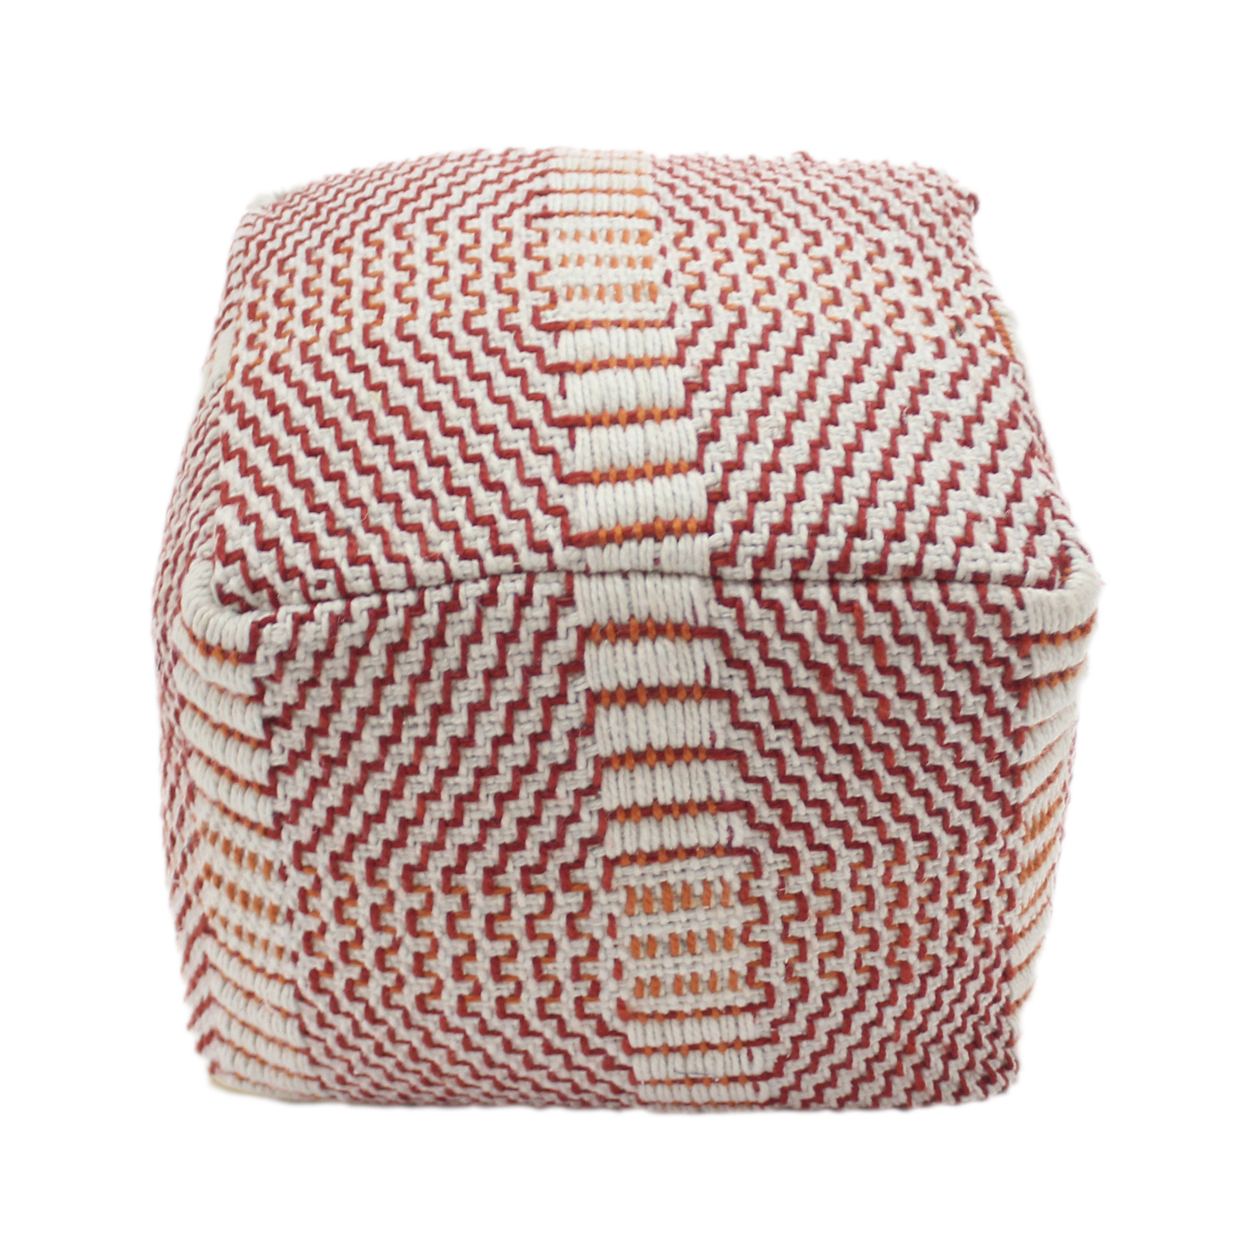 Dexter Bay Outdoor Handcrafted Boho Water Resistant Cube Pouf, Red and Orange - image 4 of 5